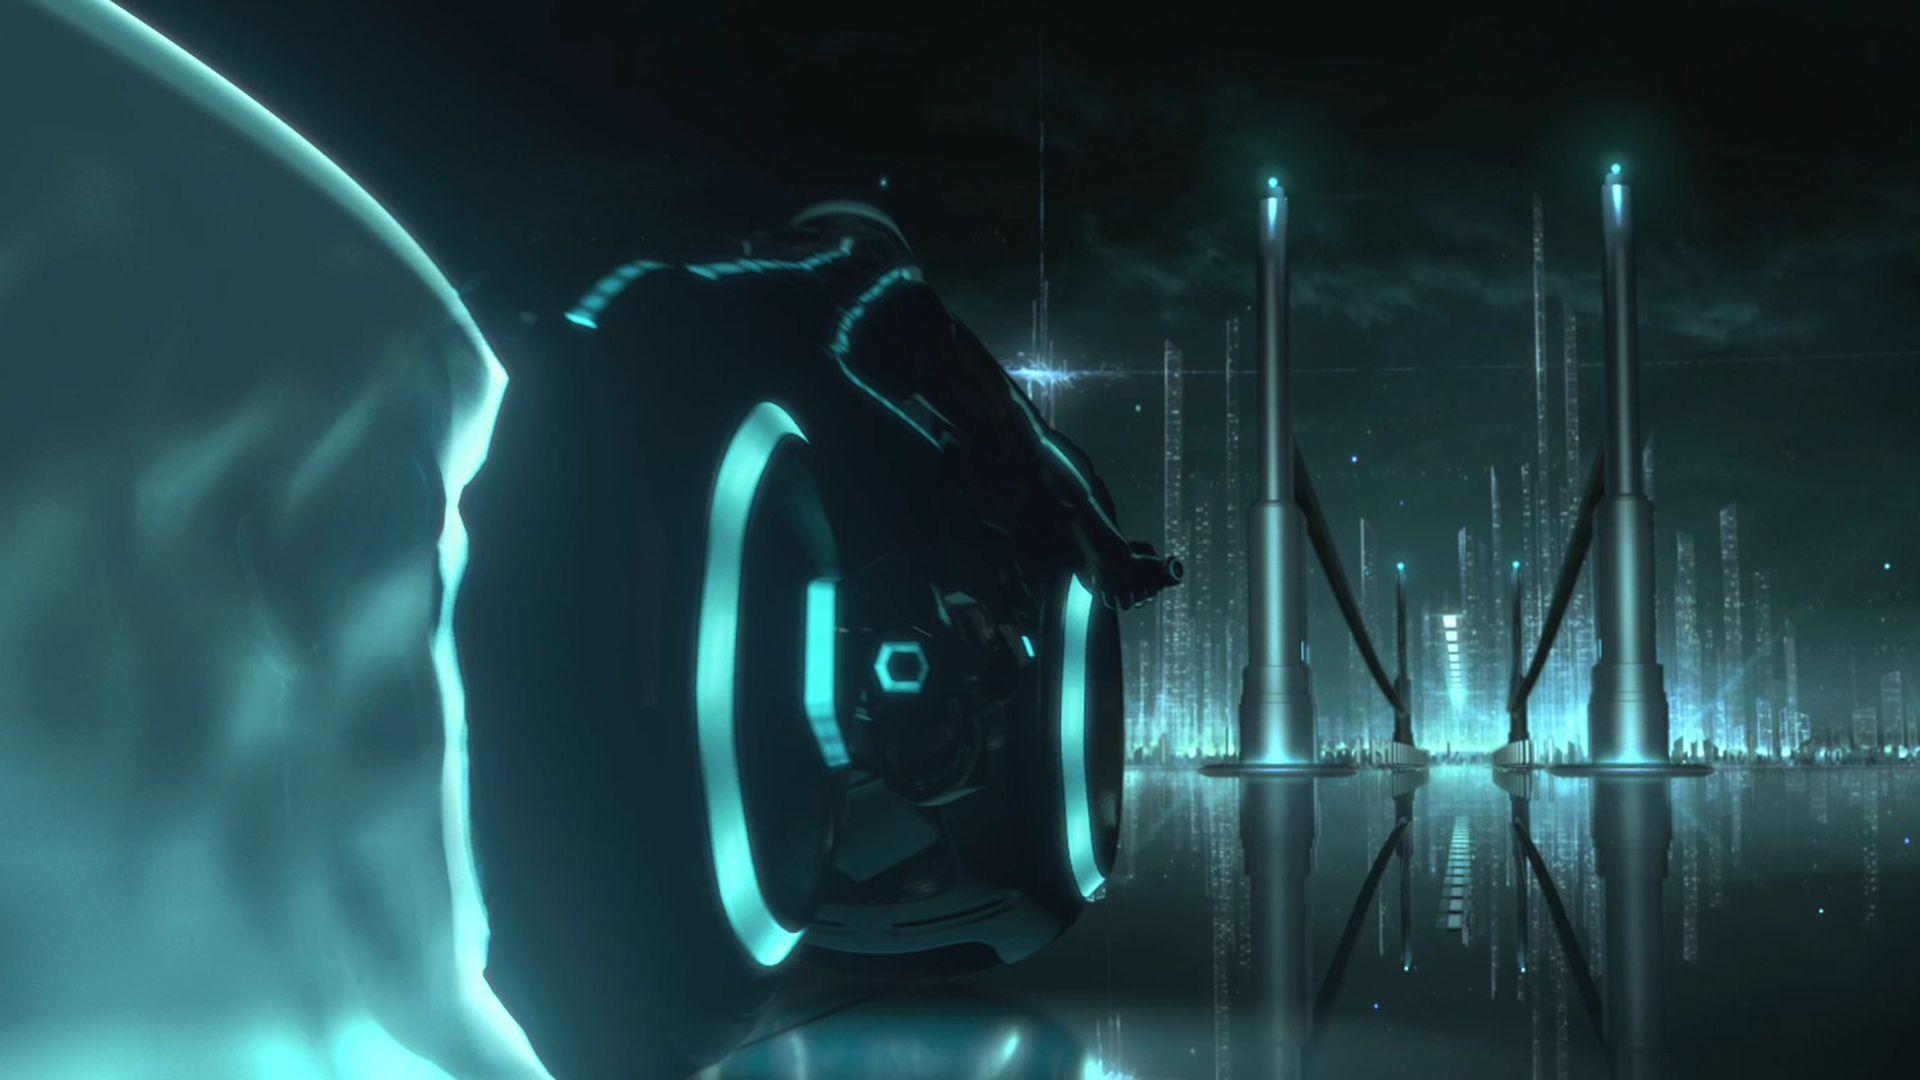 Tron: Legacy Wallpapers